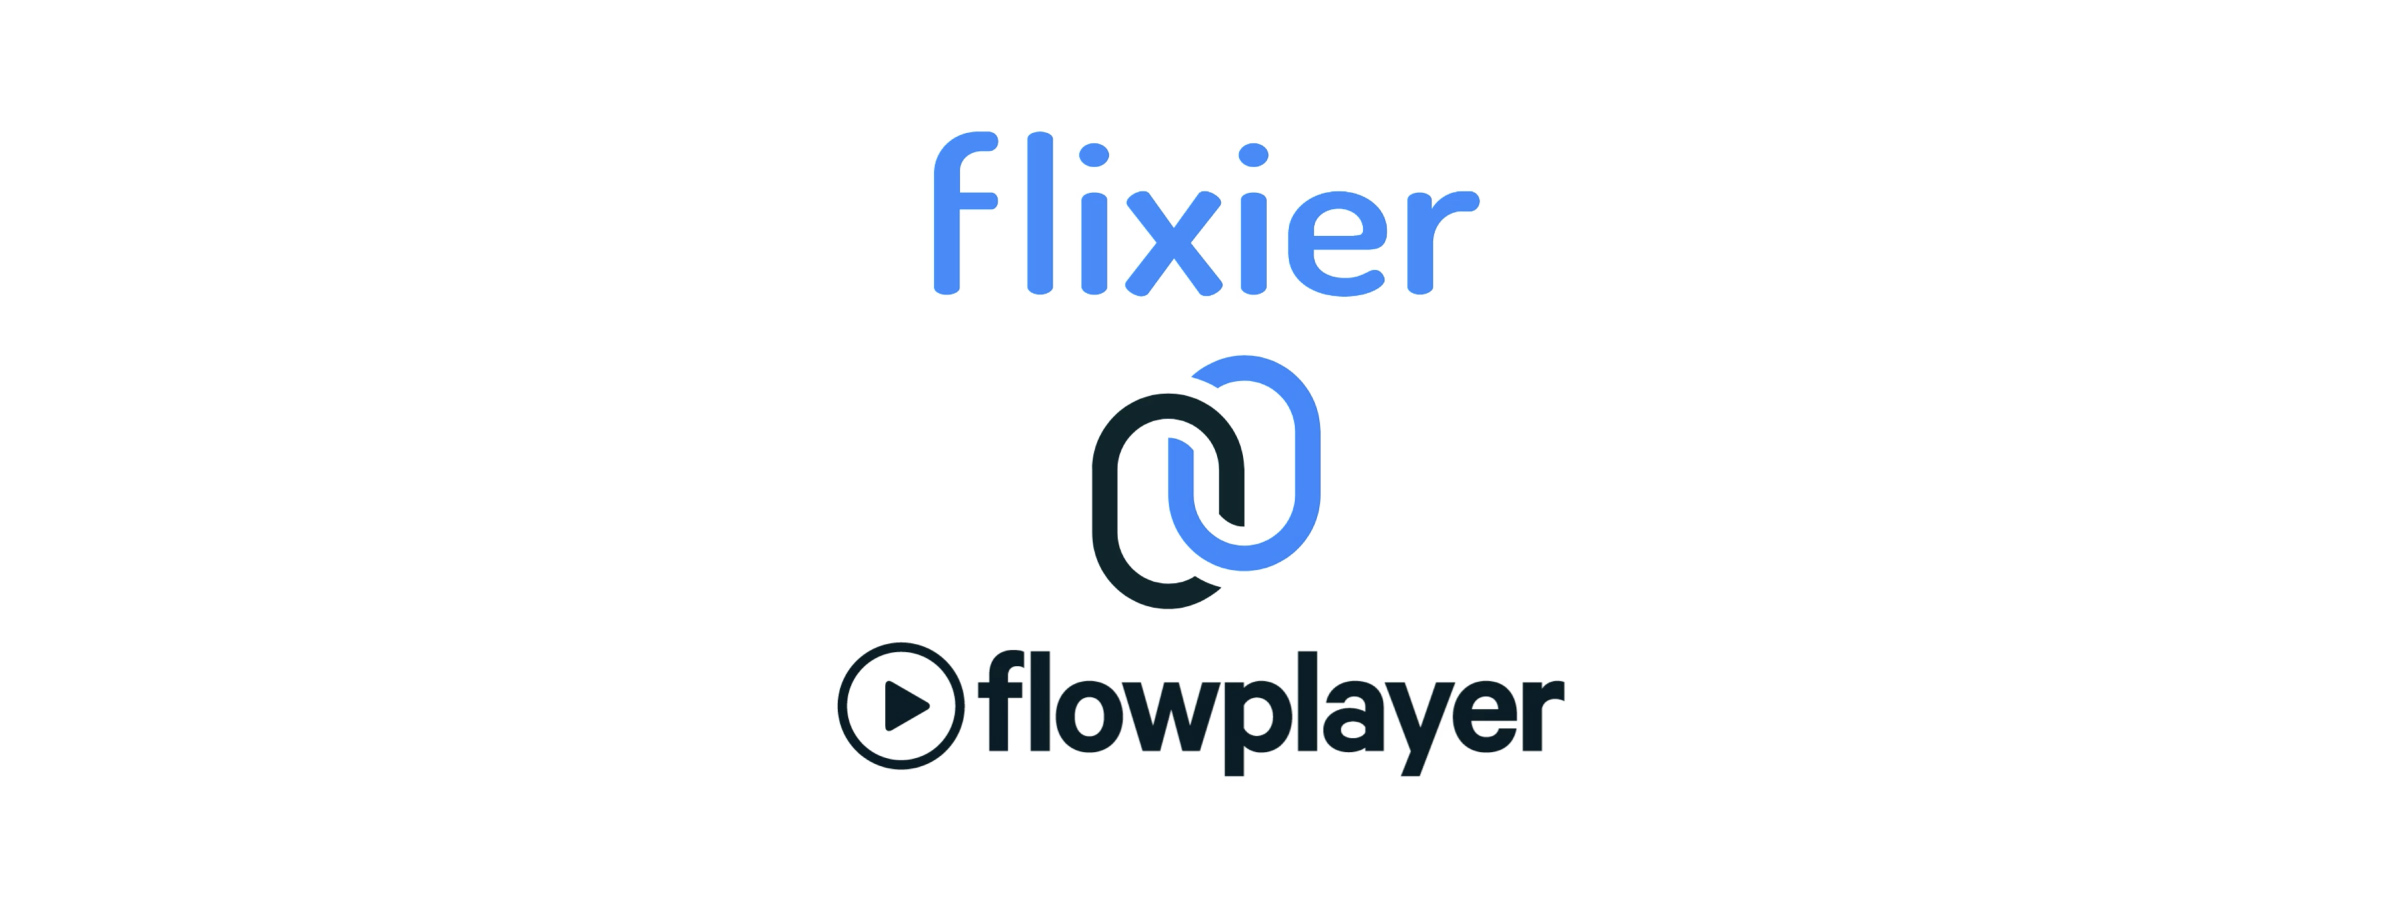 Flowplayer partners with Flixier to make online video editing easy